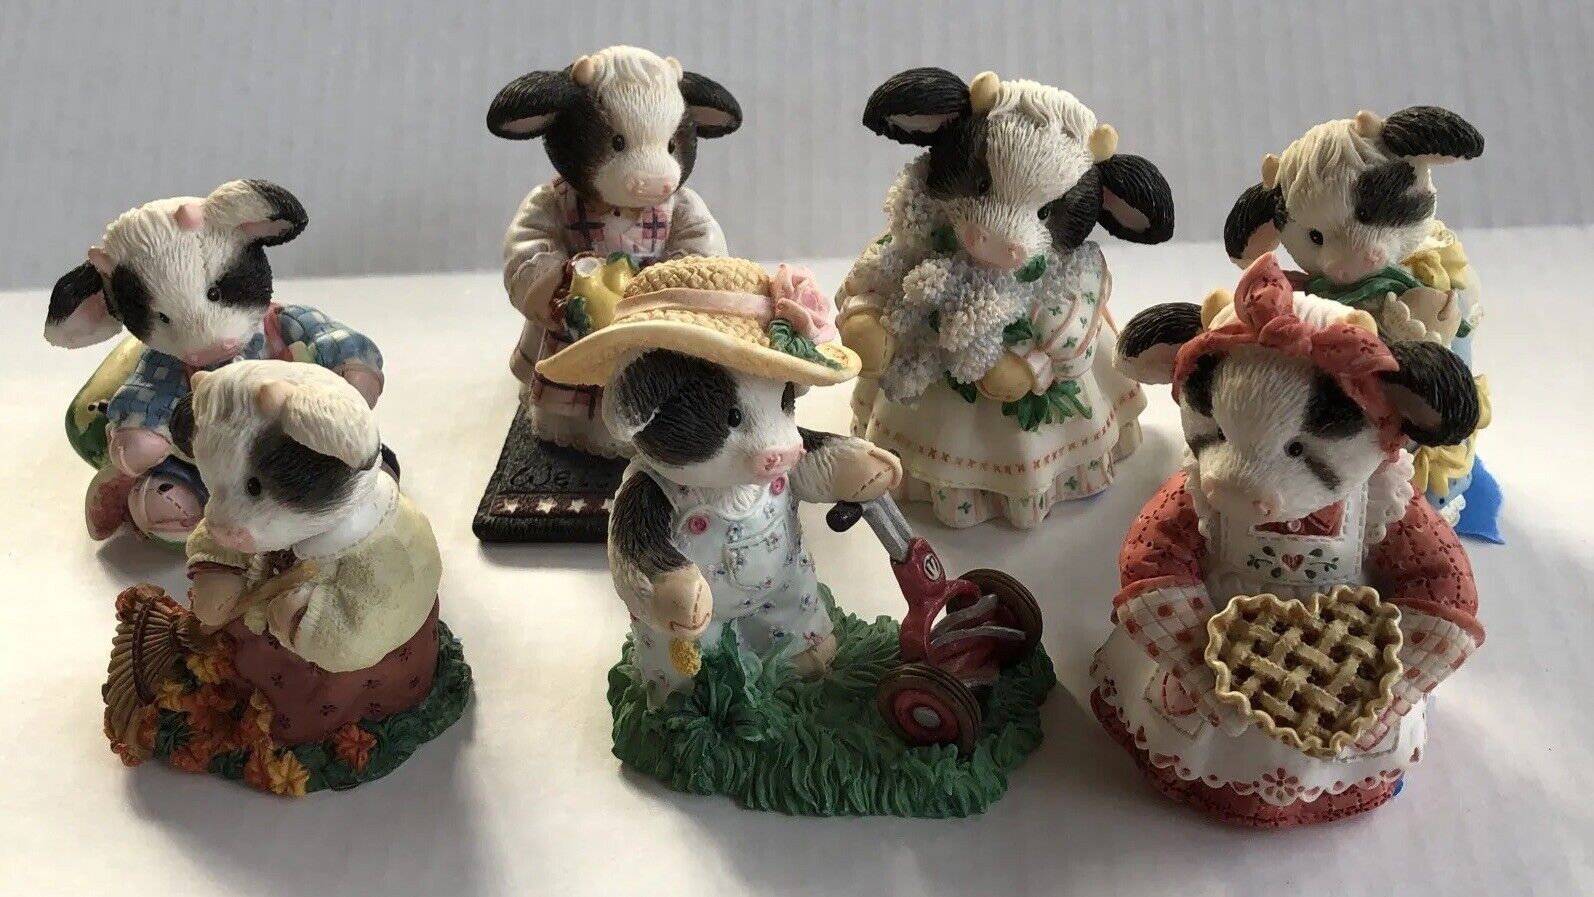 Marys Moo Moos Cow Figurines By Enesco Lot Of 7 Vtg Read Details For Each One